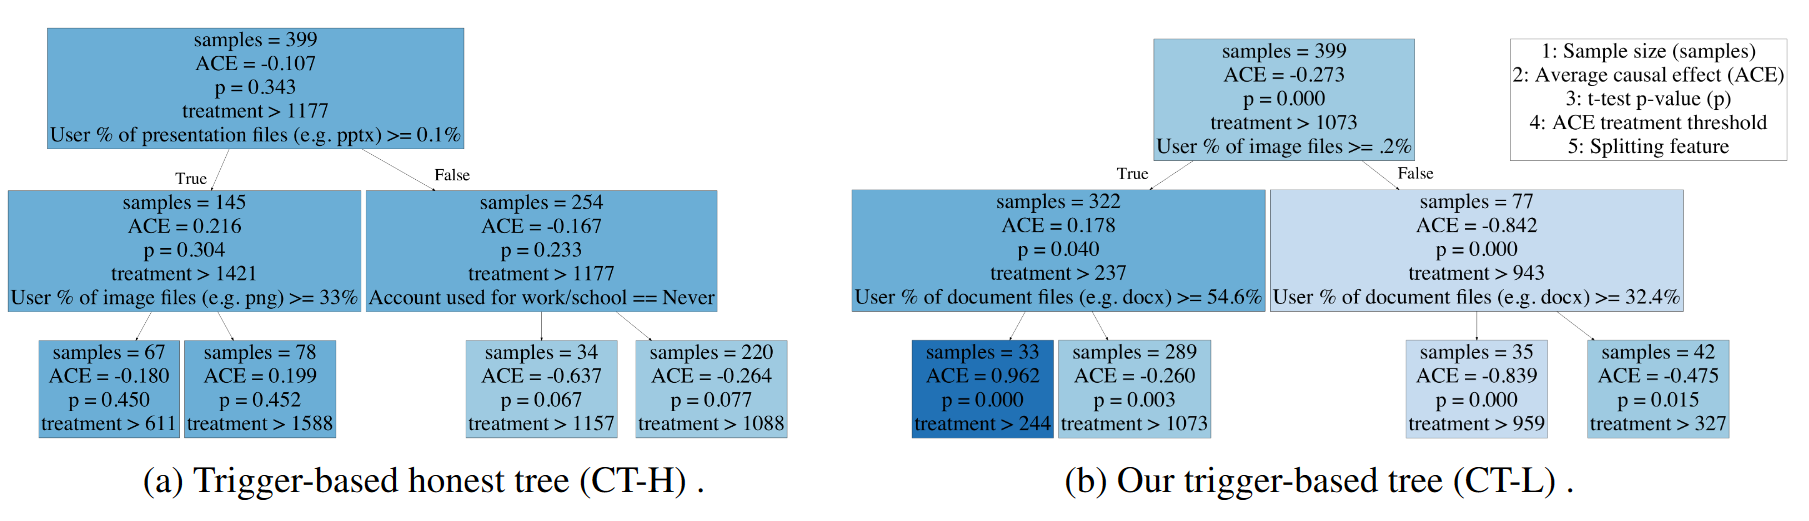 Figure comparison between baseline and proposed causal trees